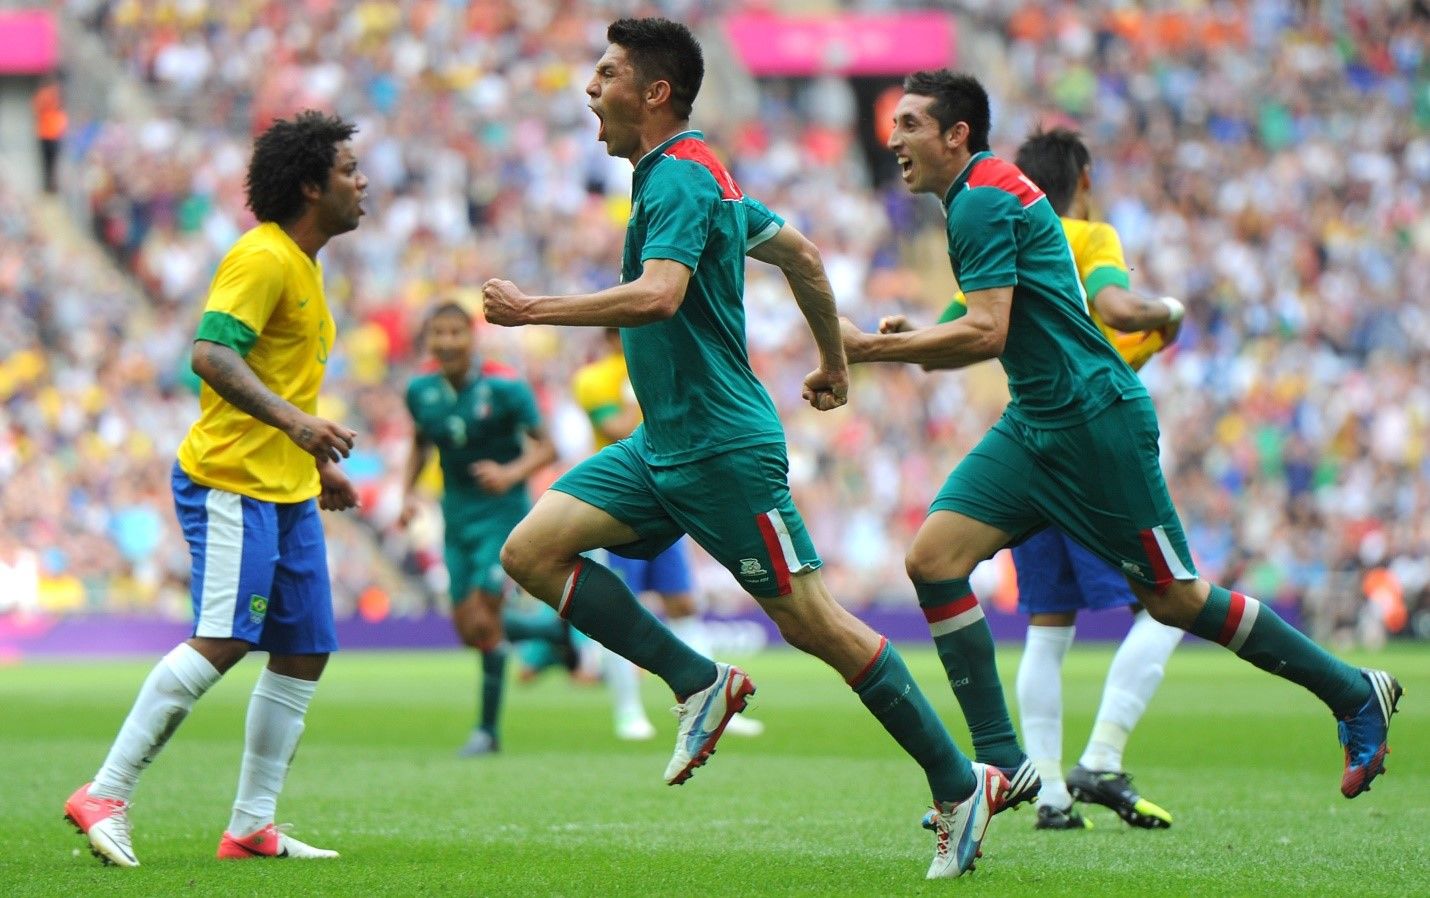 Men's Olympic Football: Mexico vs. Brazil Match Preview, Live Stream and Odds